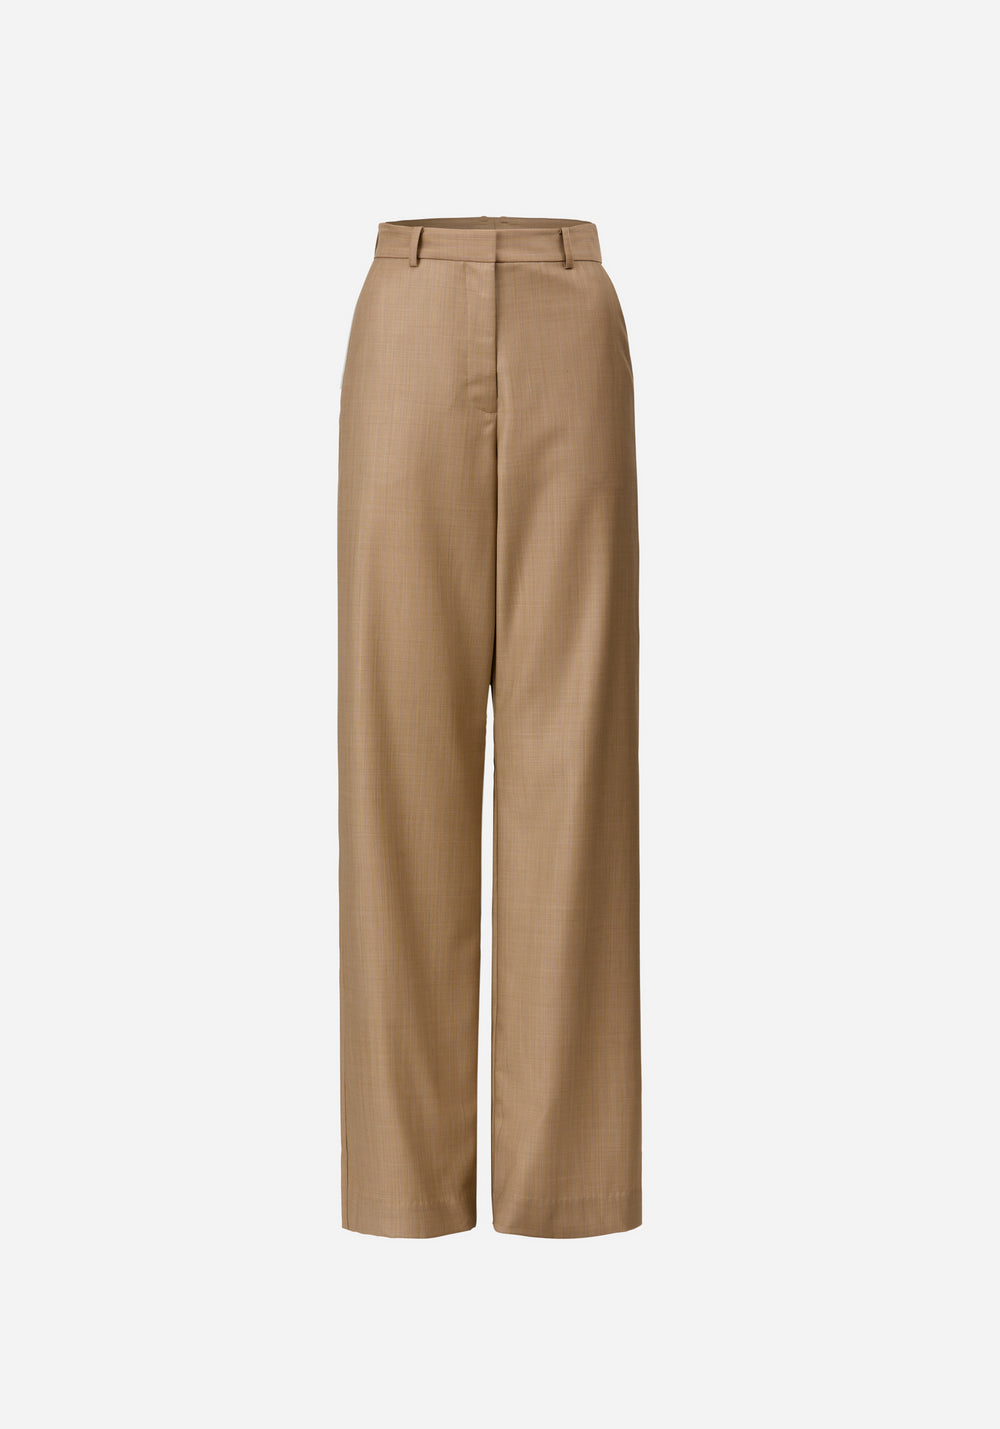 Pin on Trousers